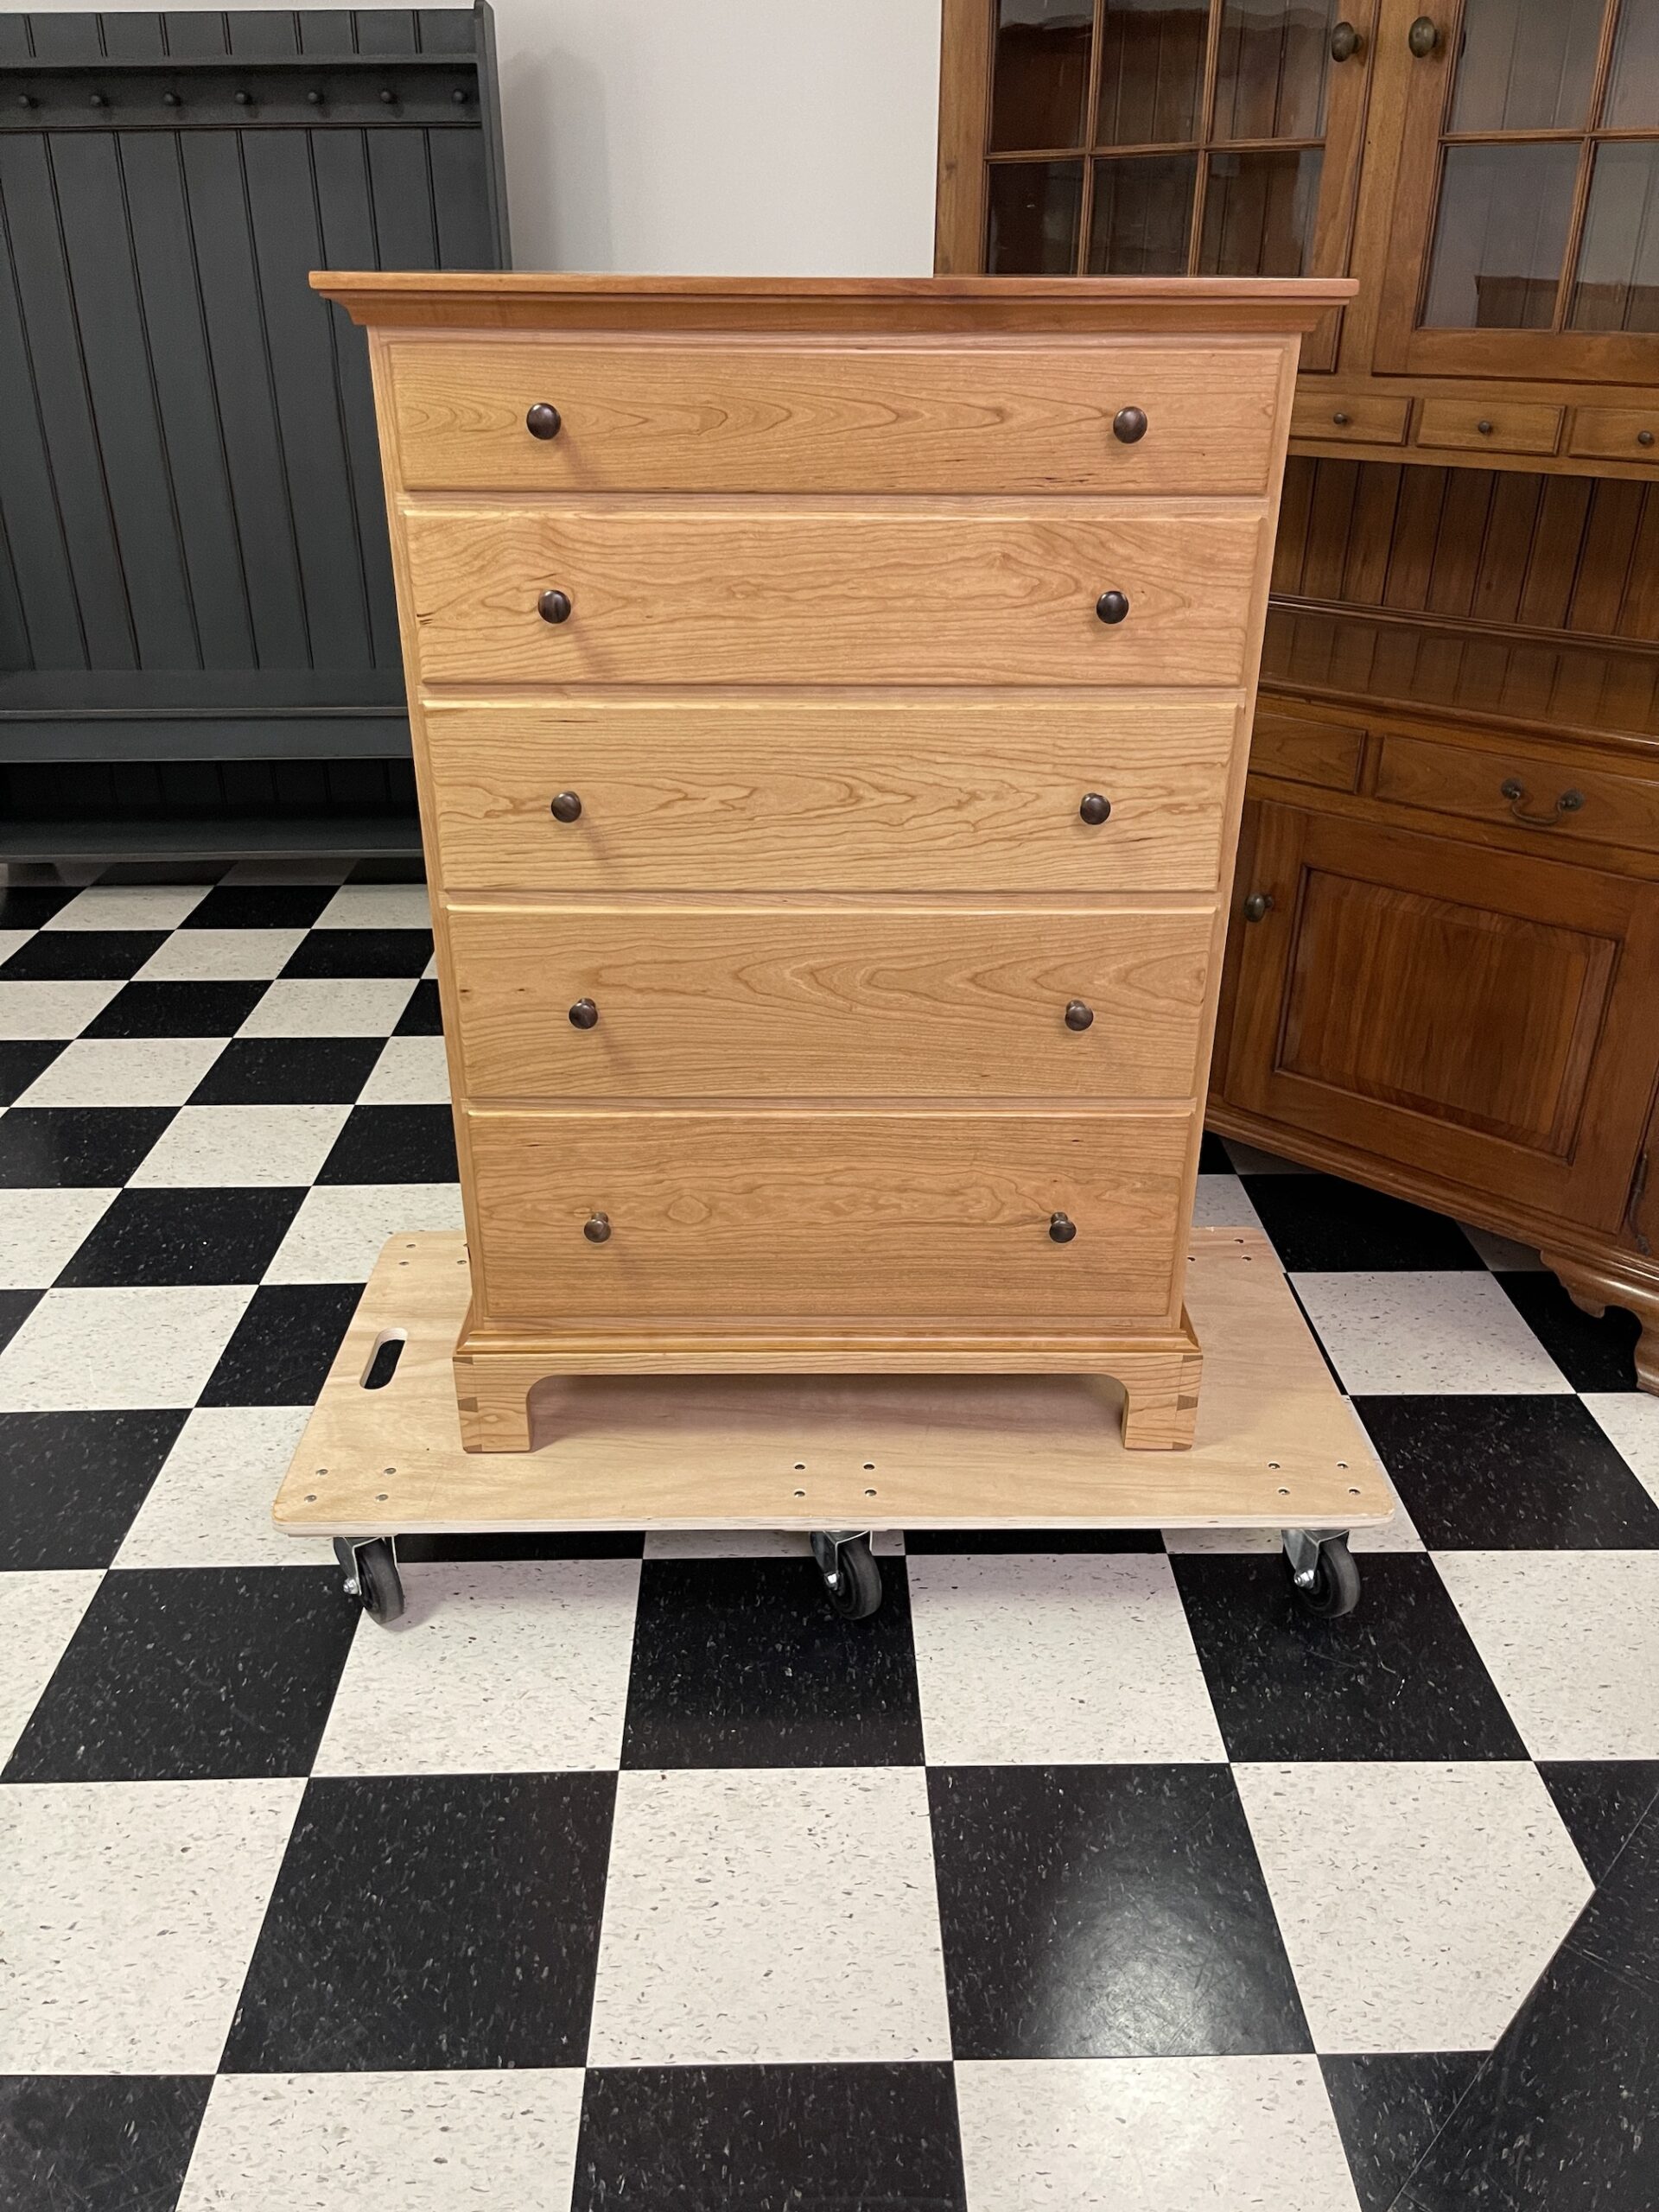 New Model - Cherry Shaker Style Chest of Drawers - 5 Drawers - Natural Finish Image